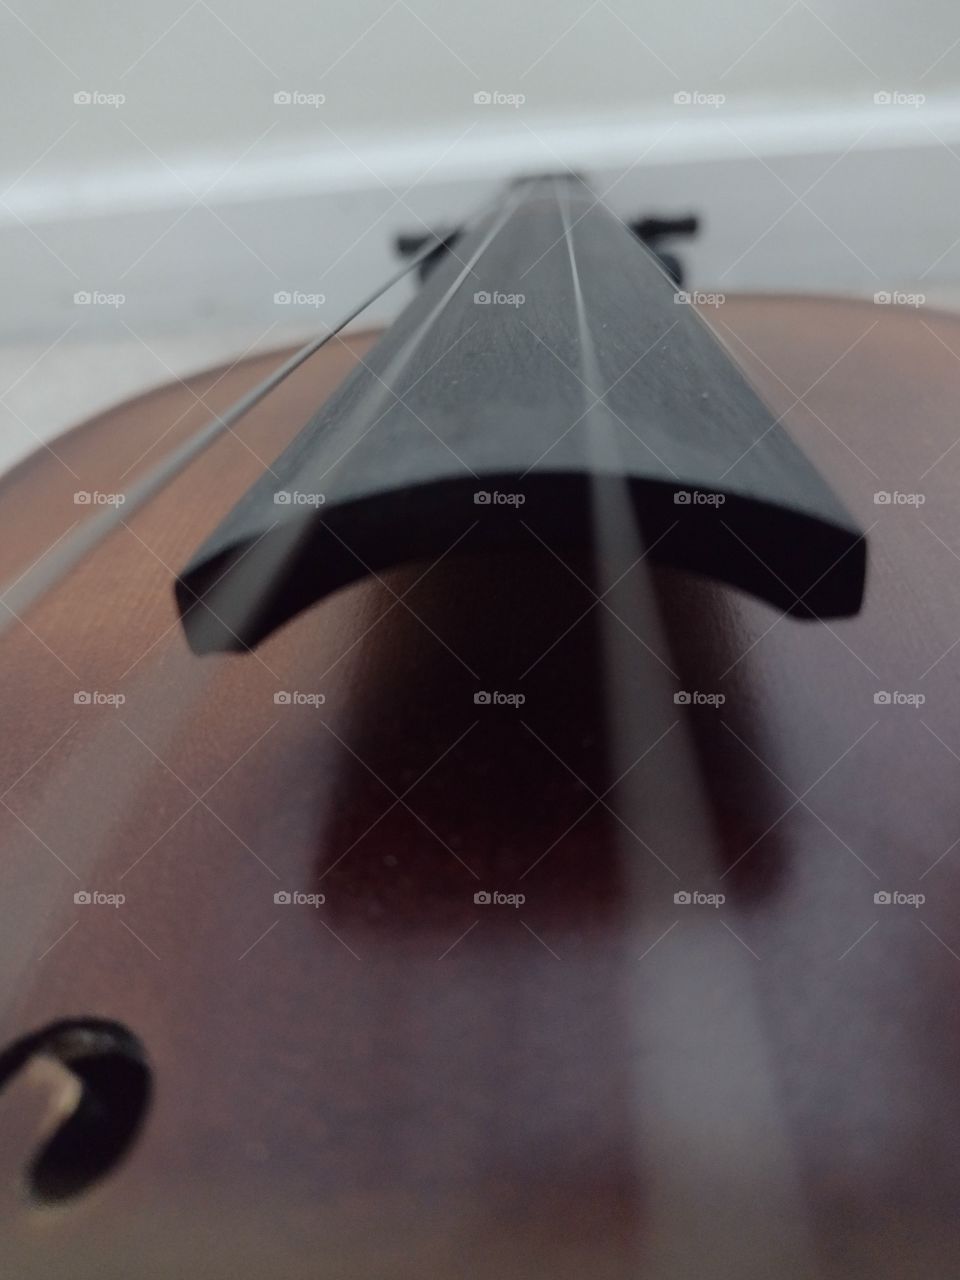 Unfiltered, beautiful close-up of a classic violins strings